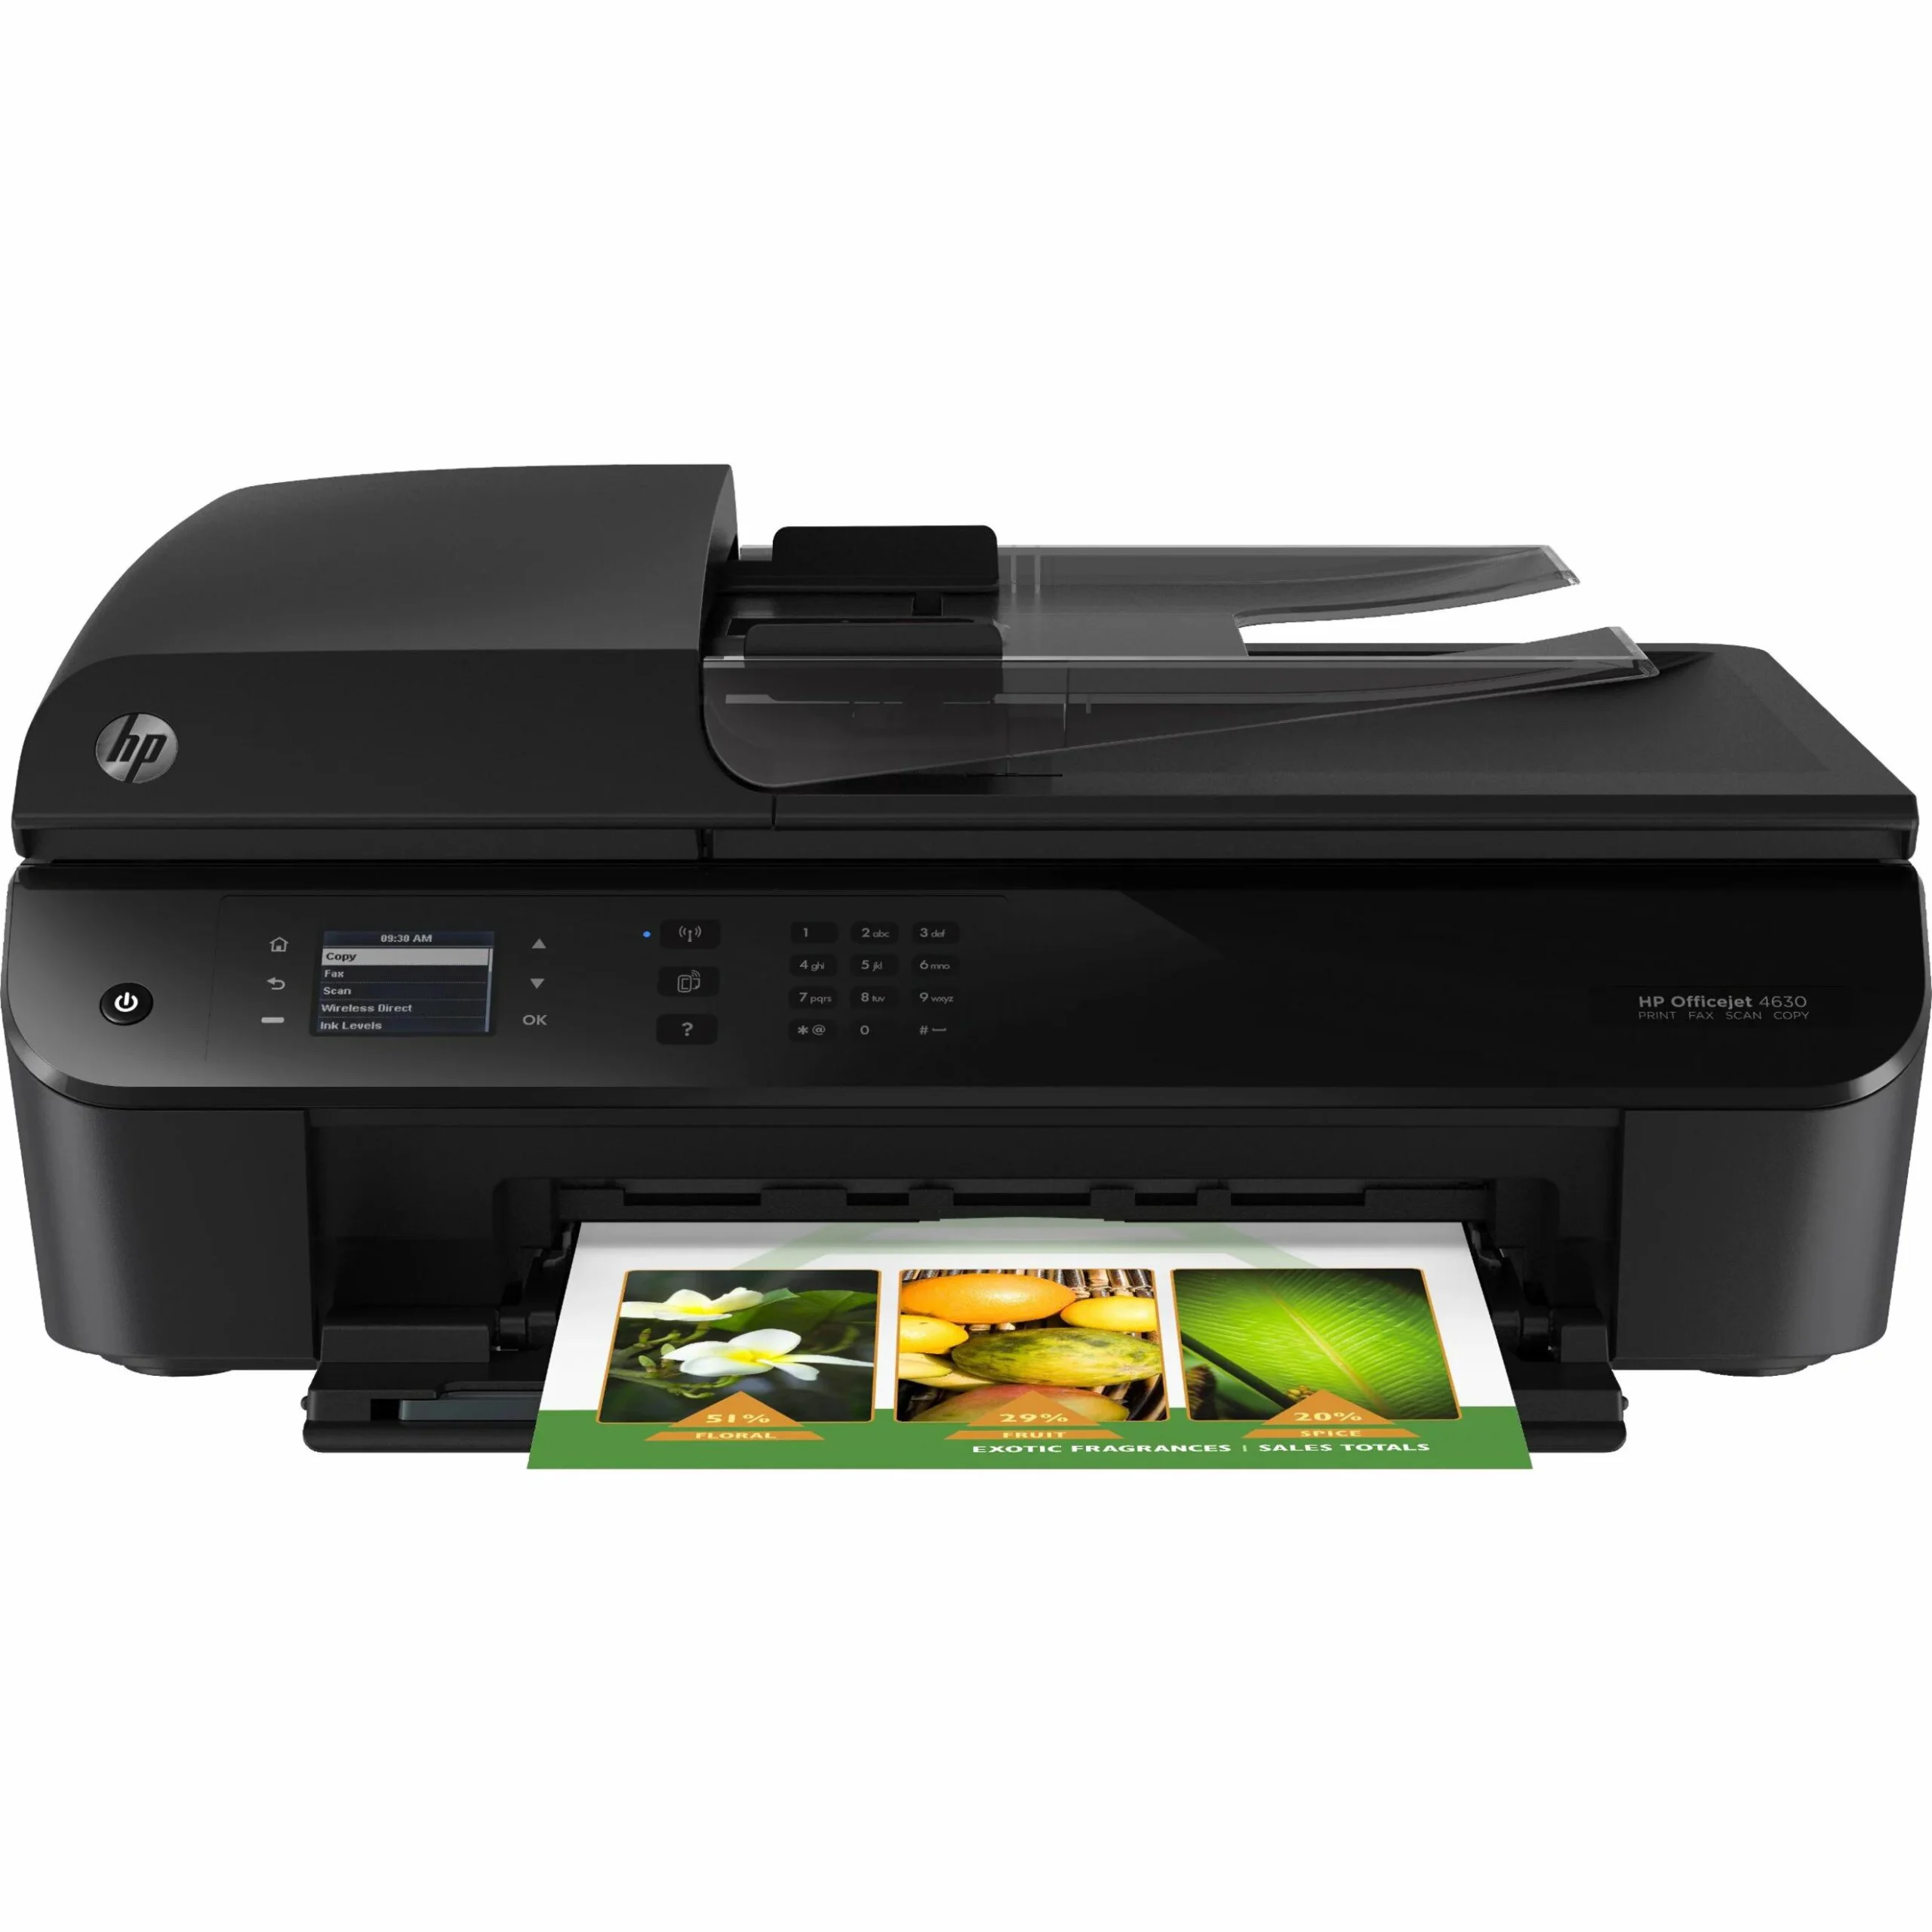 Hp 4630 printer support: troubleshooting and solutions